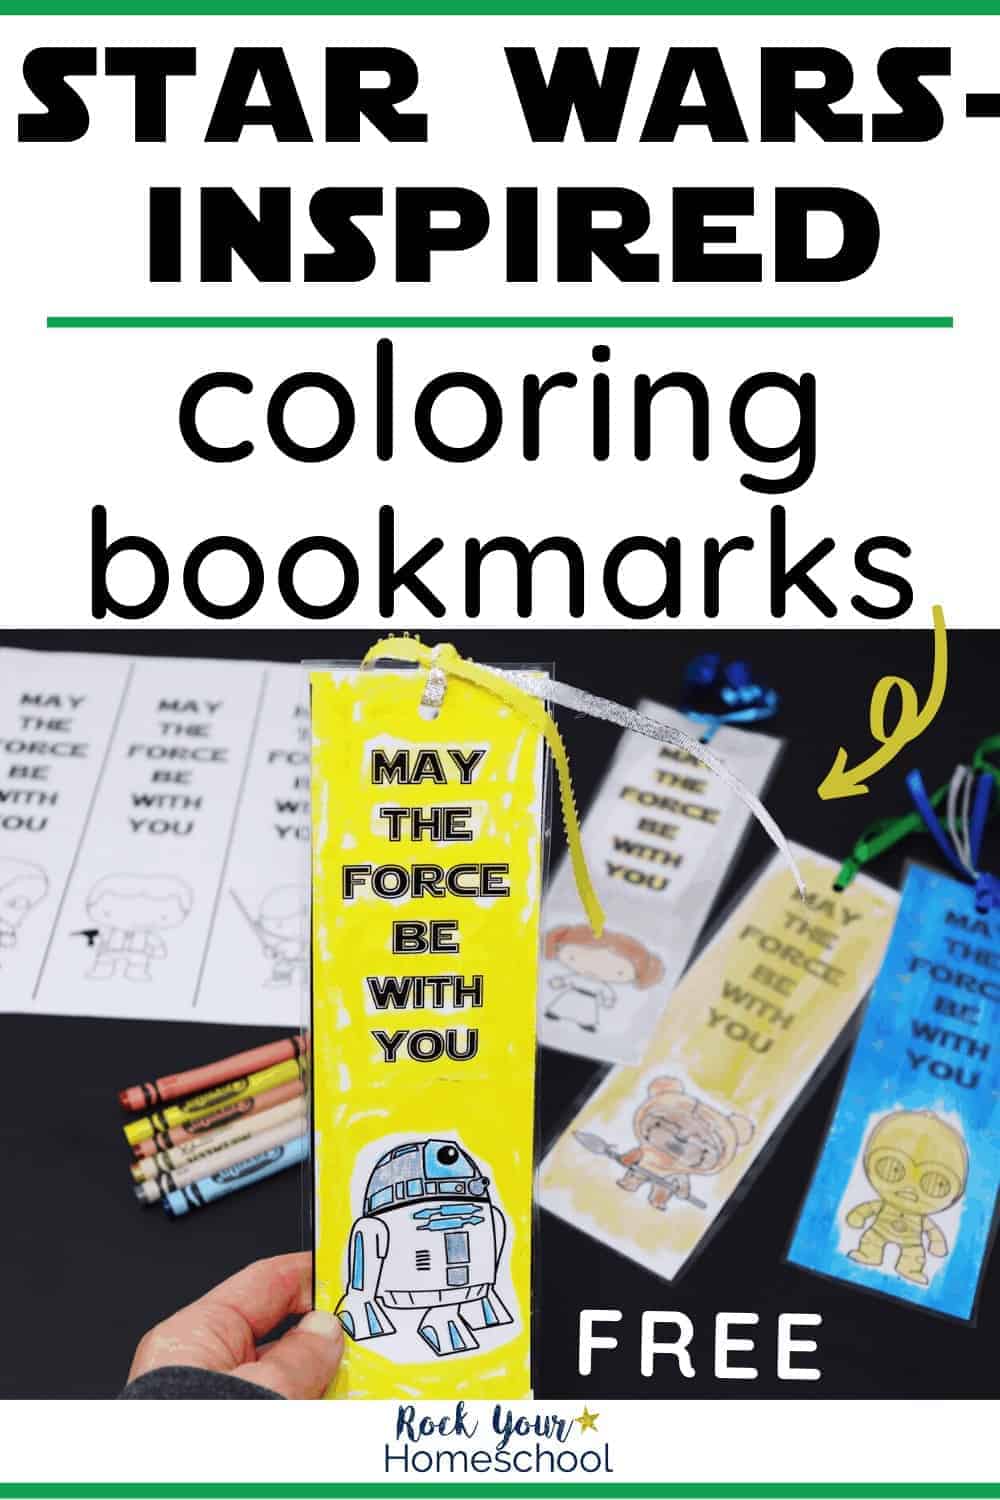 Free Star Wars-Inspired Coloring Bookmarks for Kids